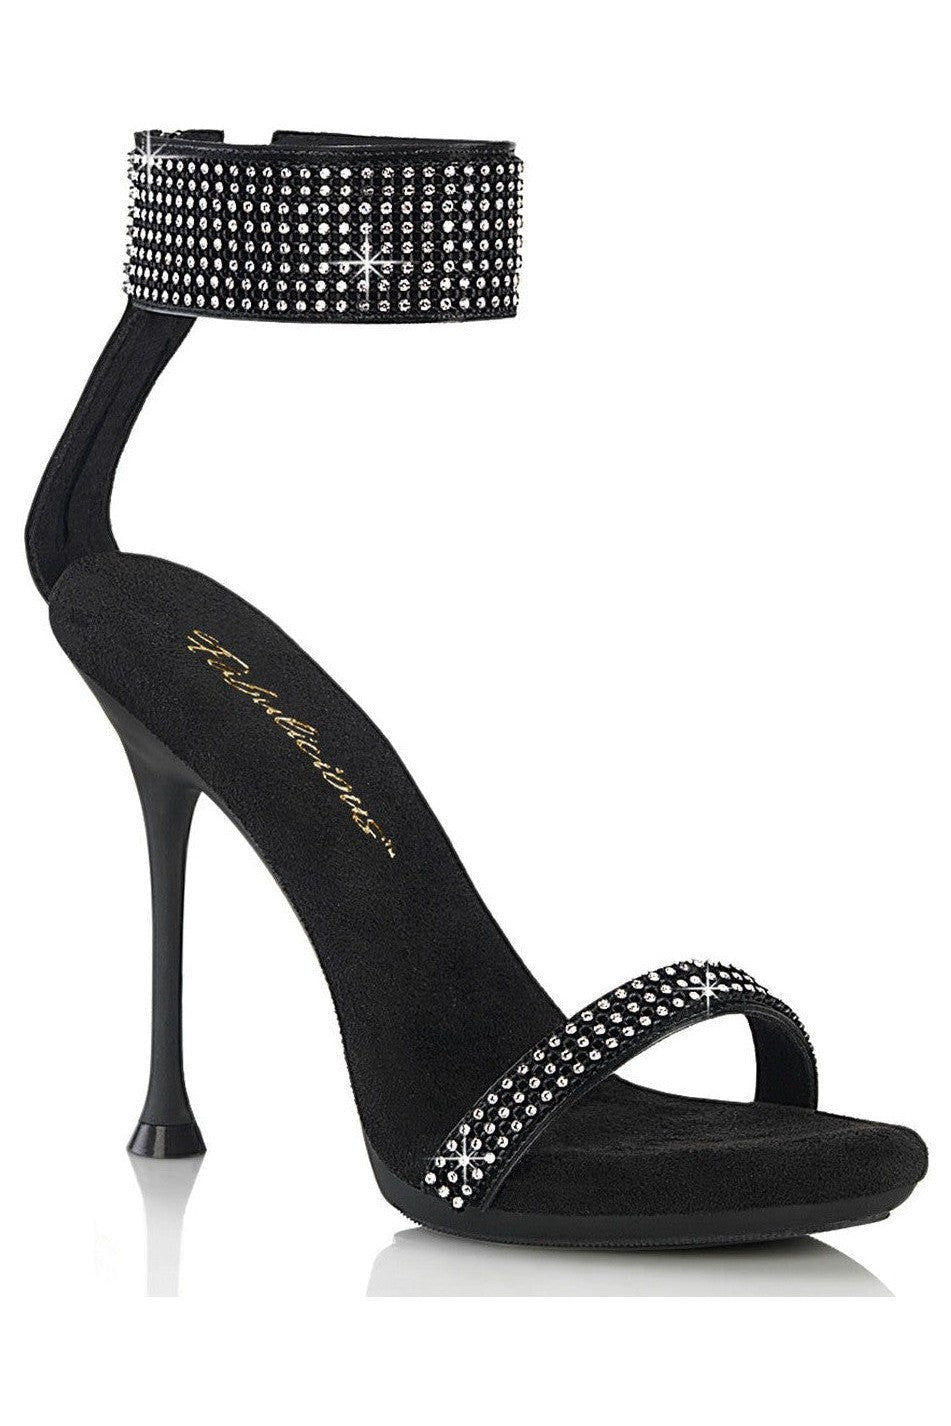 Fabulicious Black Sandals Platform Stripper Shoes | Buy at Sexyshoes.com